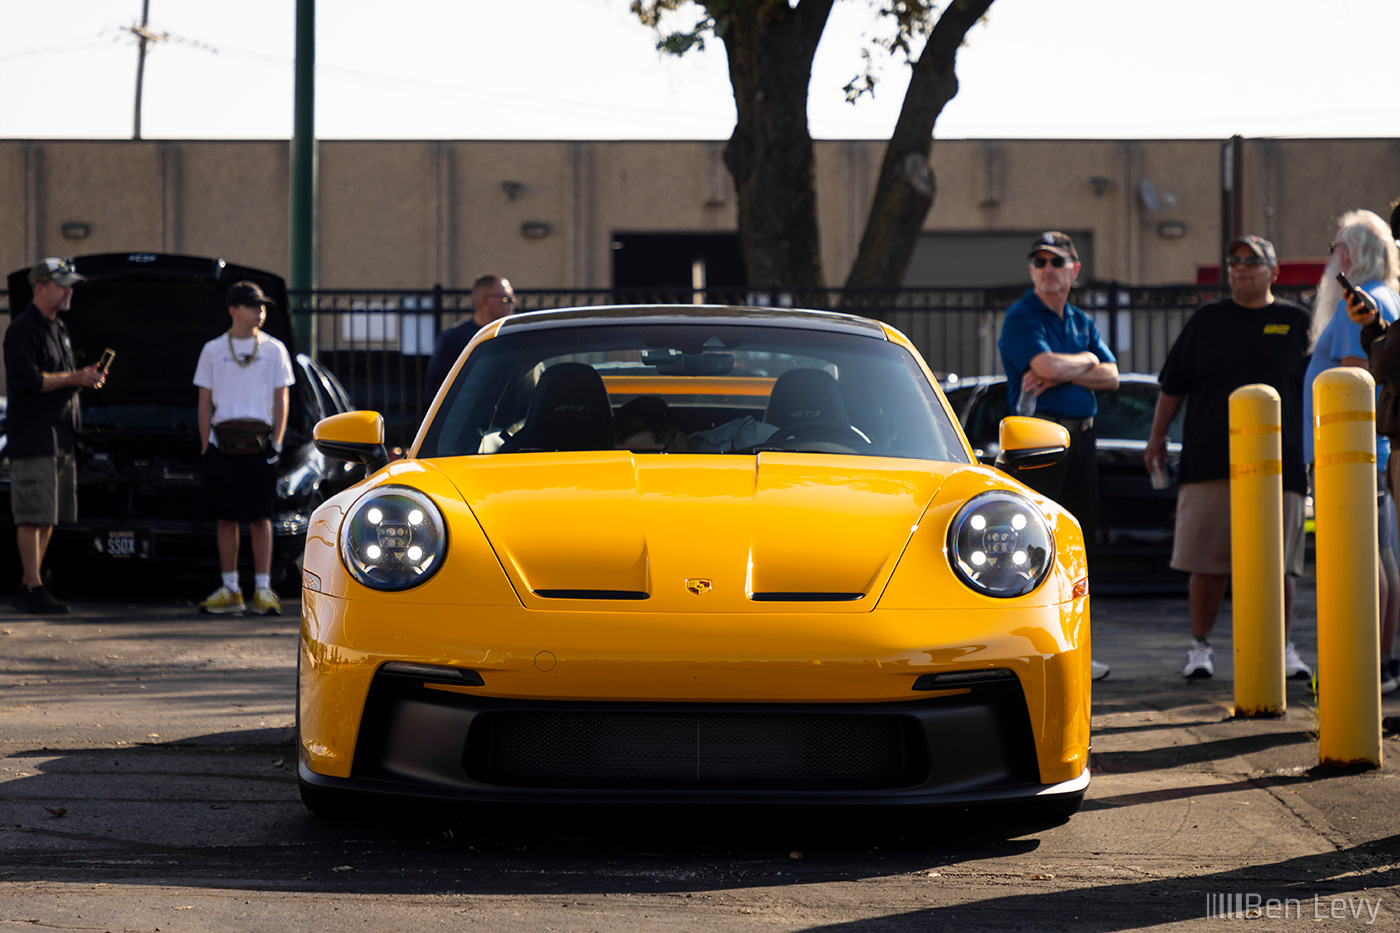 Front of Signal Yellow 911 GT3 at Car Meet in Chicago